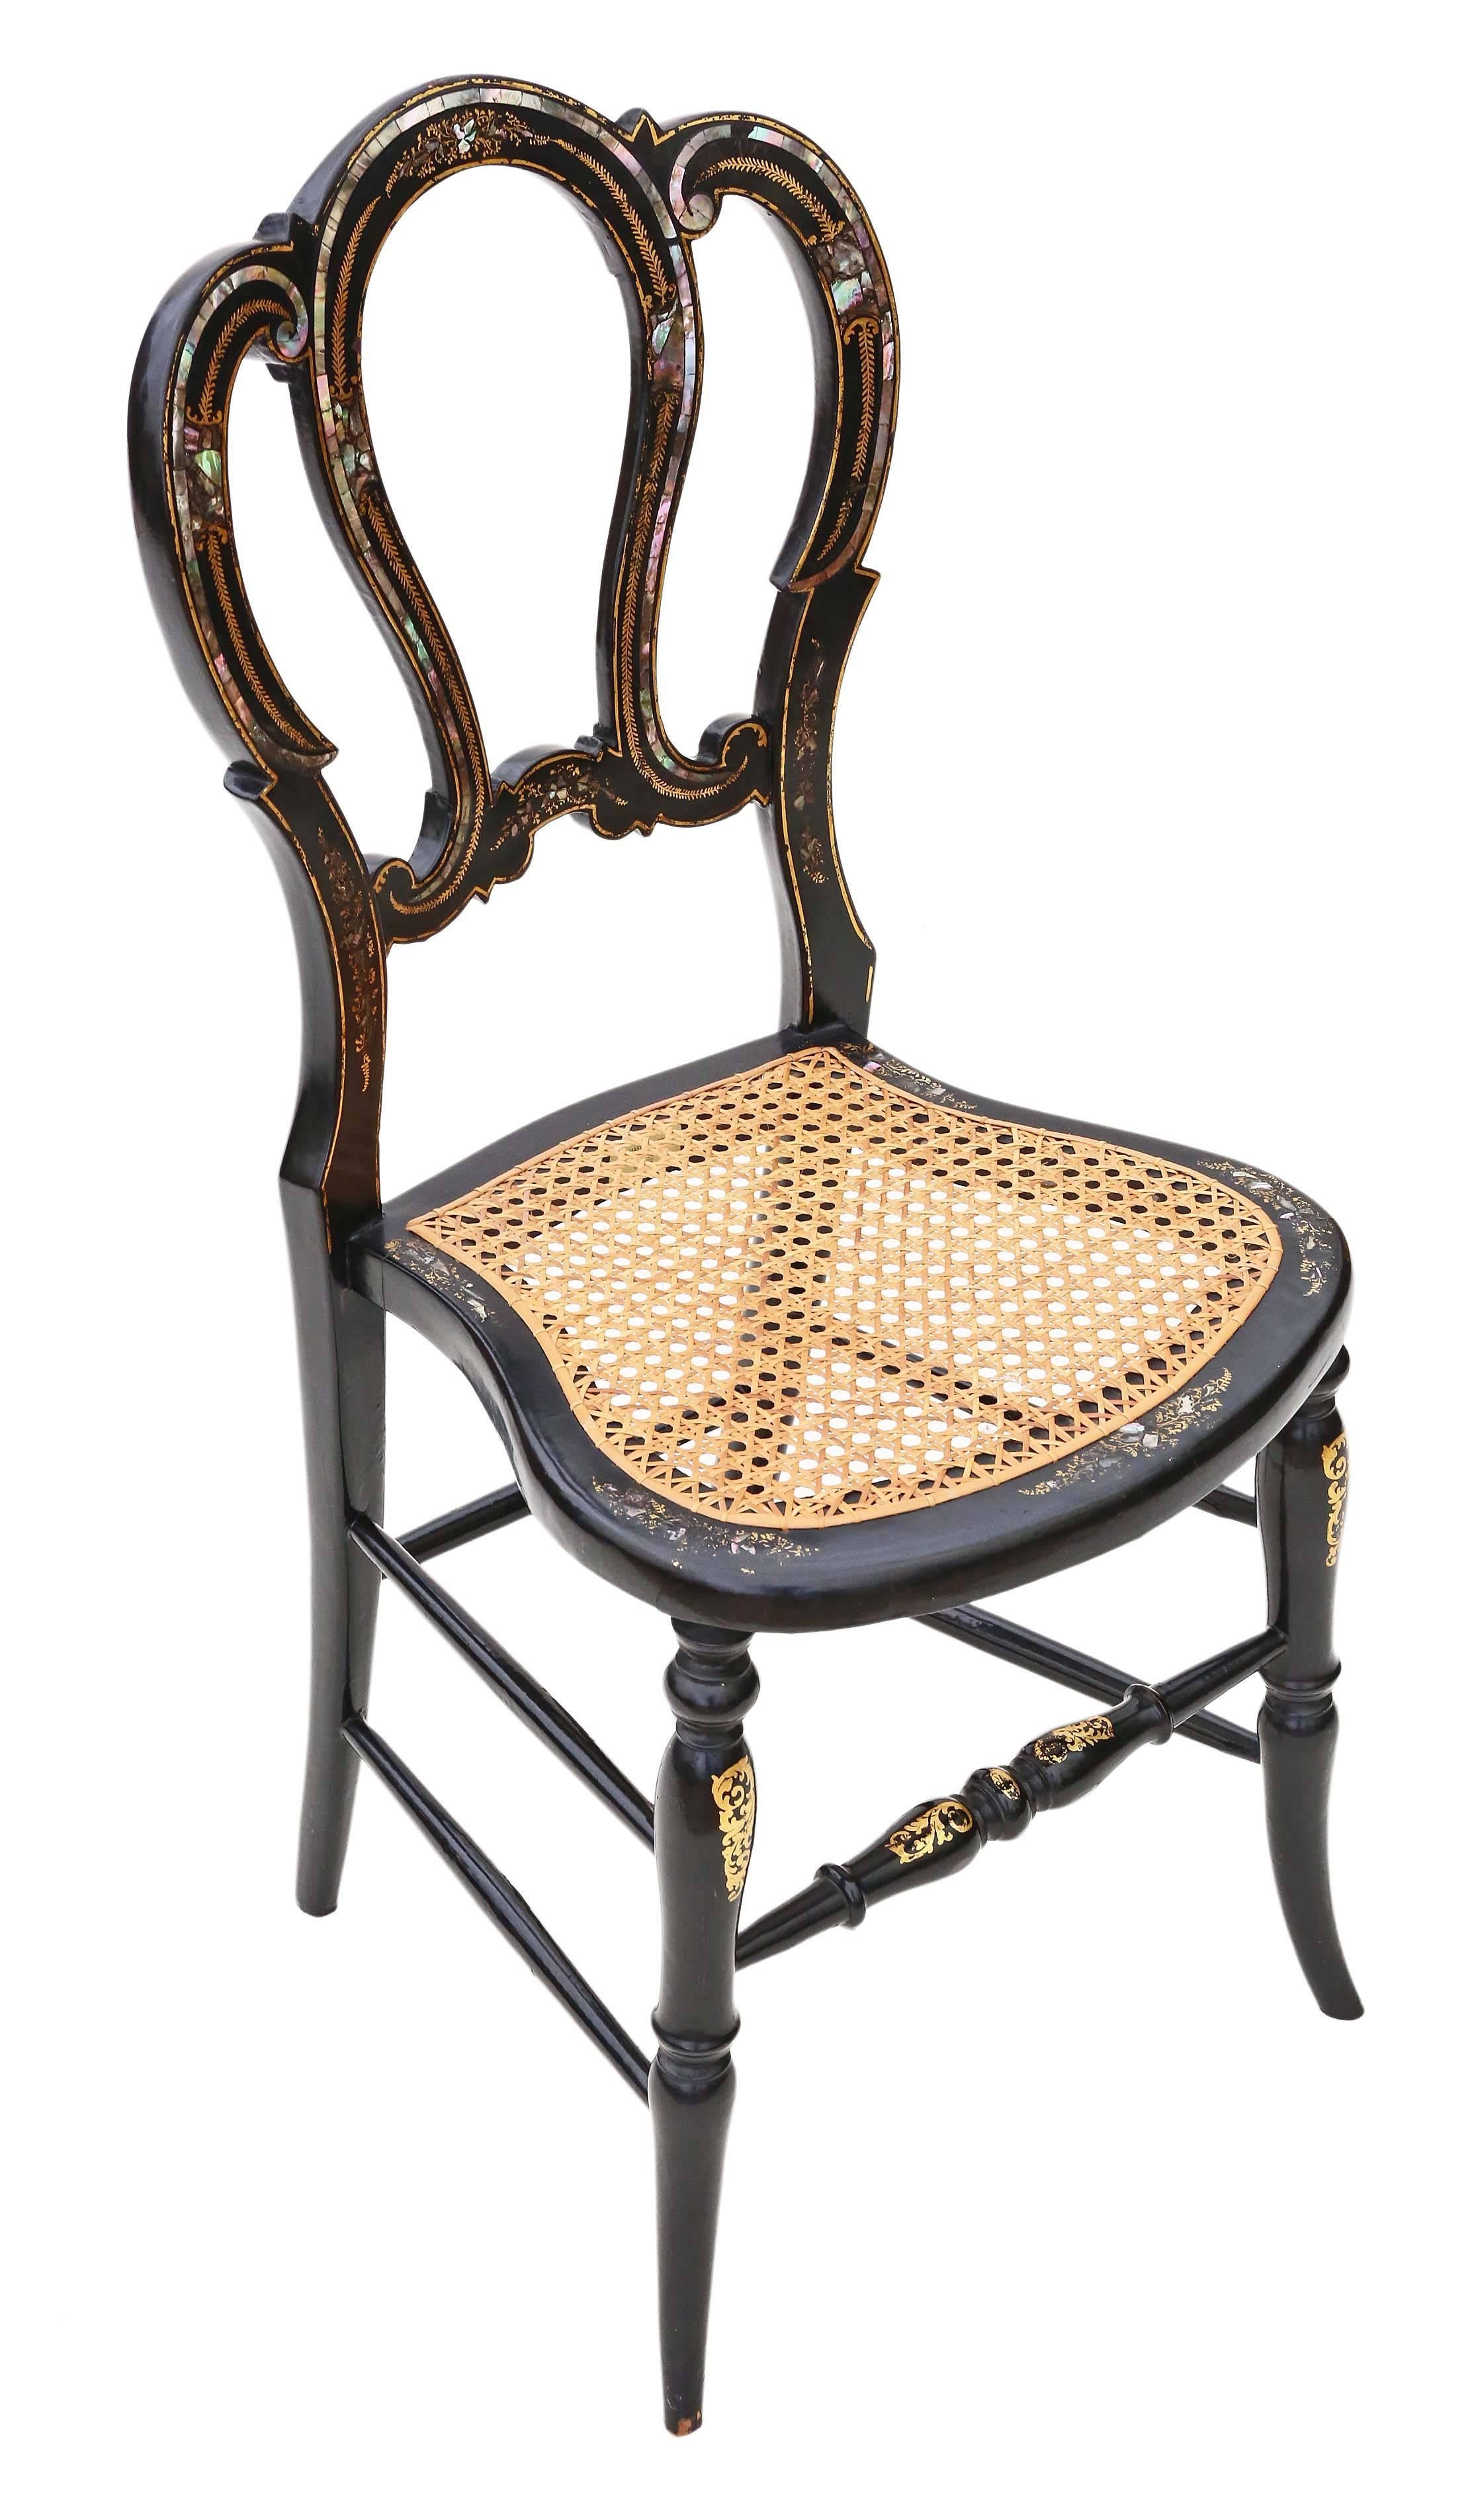 Antique Rare Victorian, circa 1890 Mother-of-Pearl Cane Inlaid Bedroom Chair In Good Condition For Sale In Wisbech, Walton Wisbech